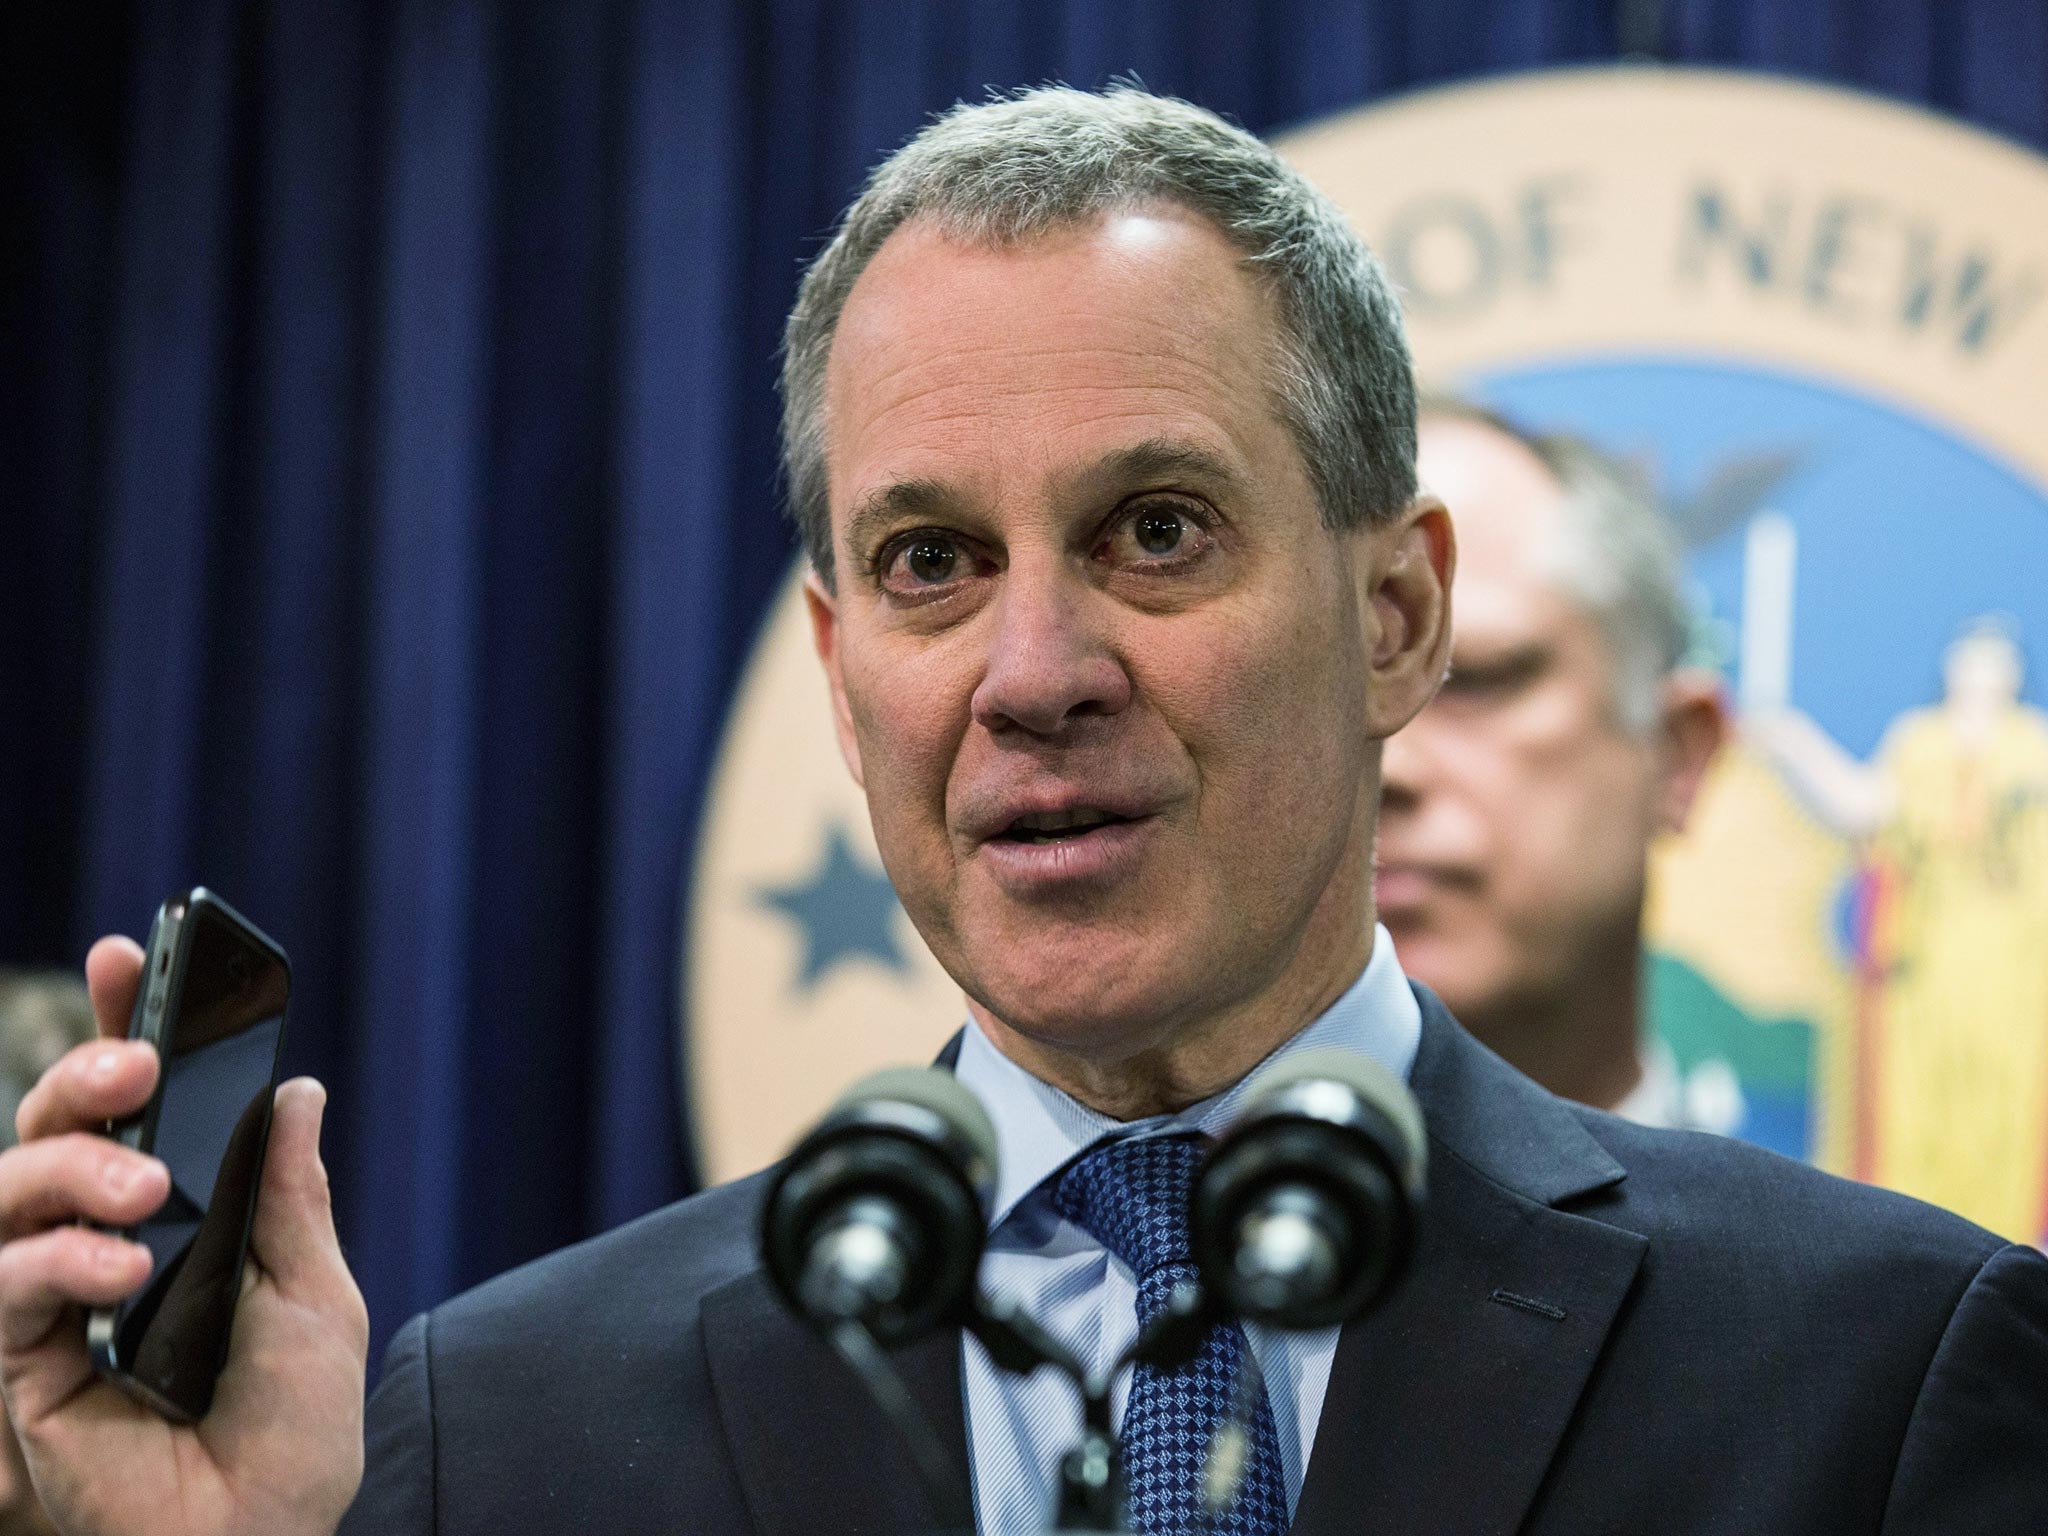 Eric Schneiderman, the New York attorney general, has strengthened his team, as he looks to oppose Donald Trump through the US legal system